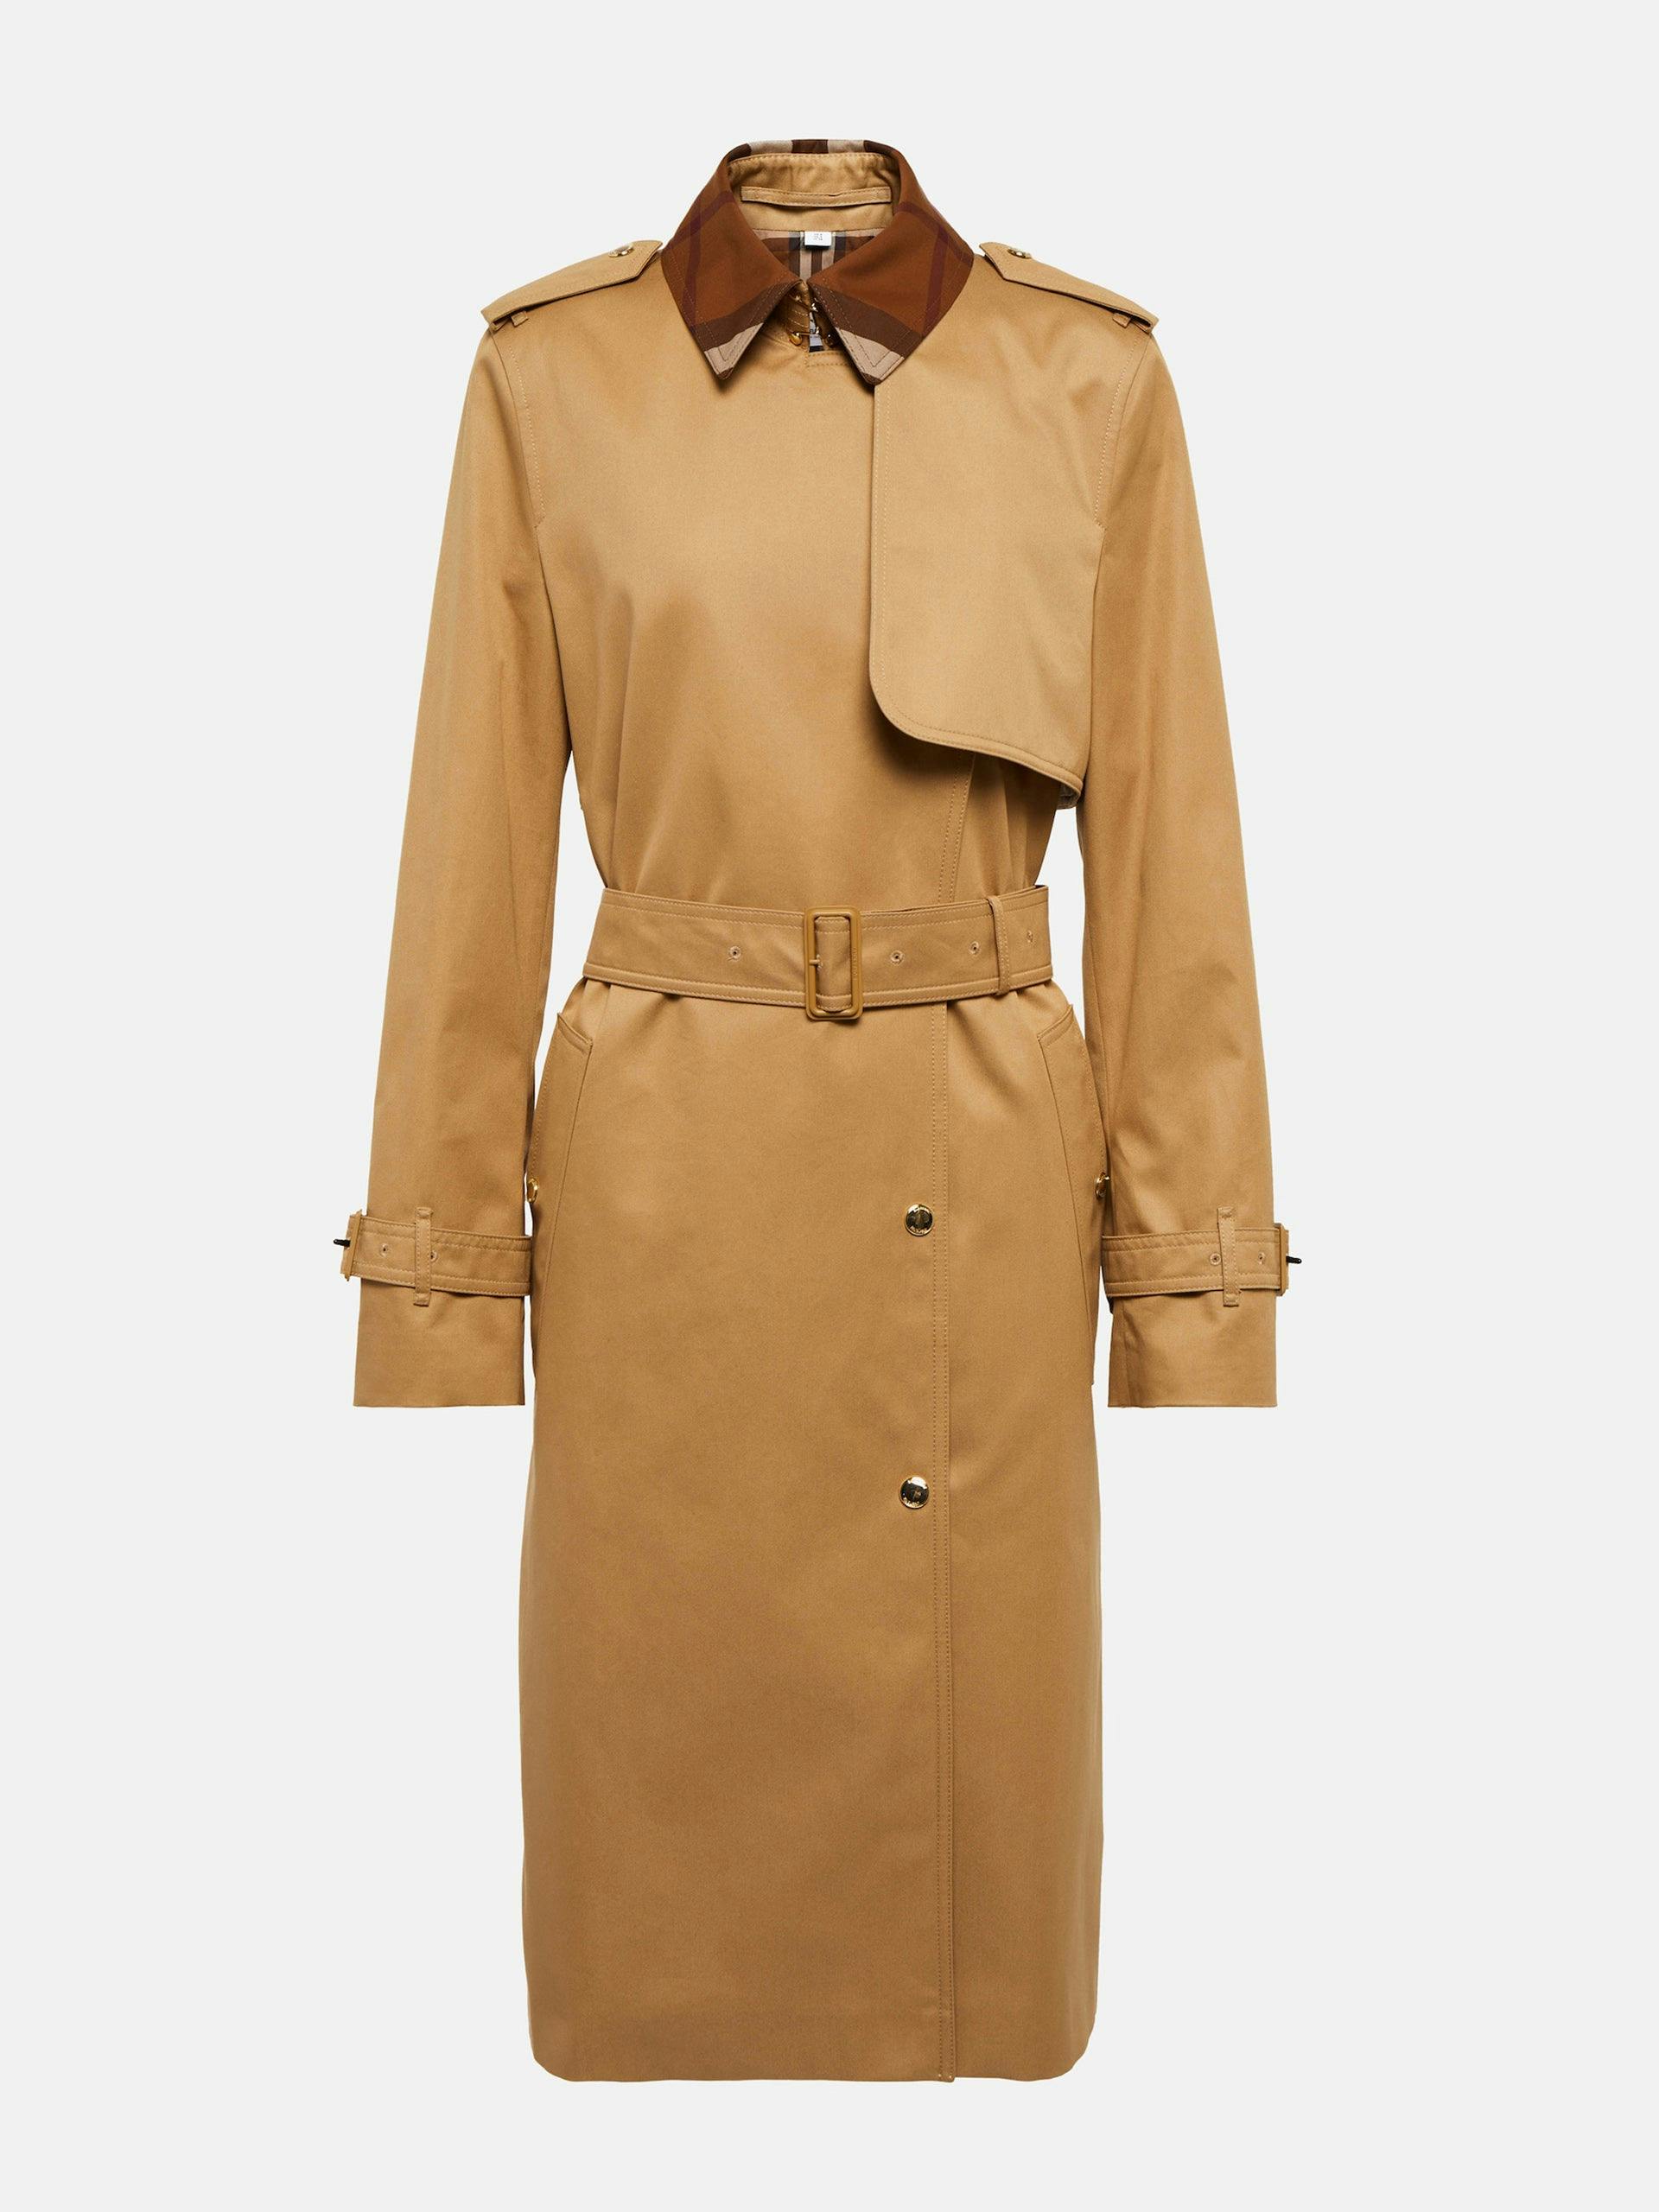 Collared cotton trench coat